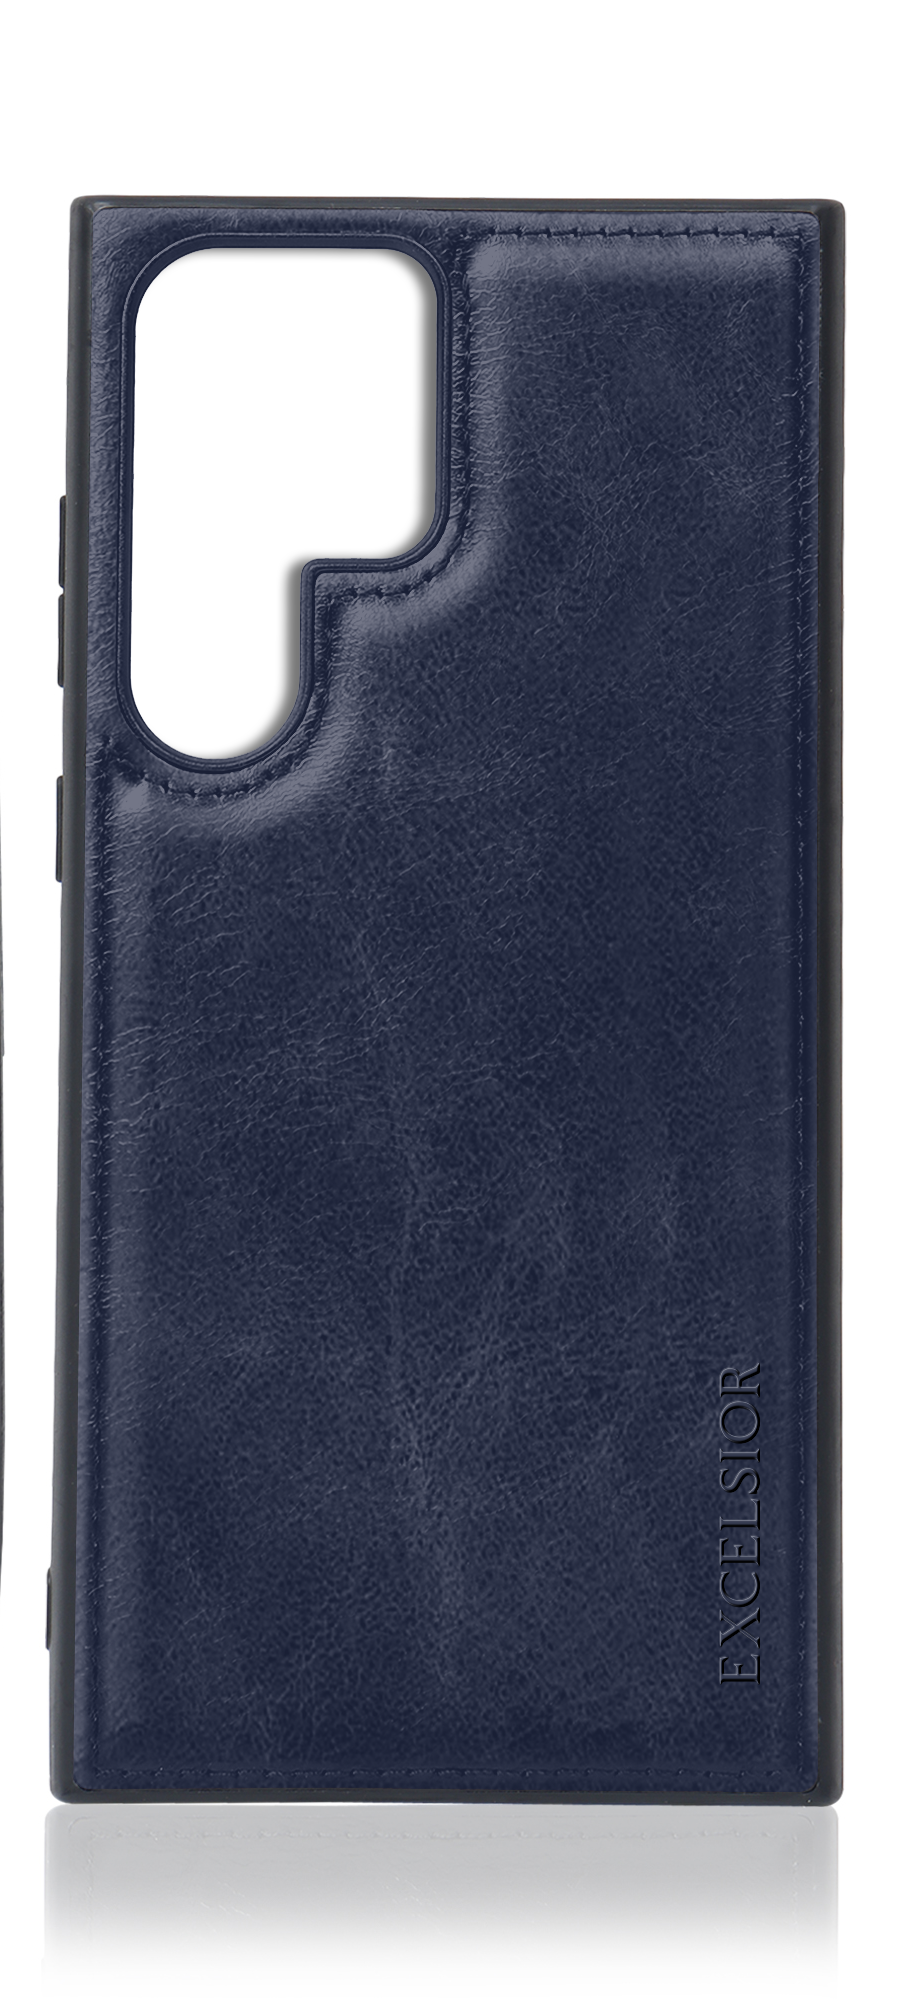 Excelsior Premium Classic PU Leather Back Cover case For Samsung Galaxy S22 Ultra 5G